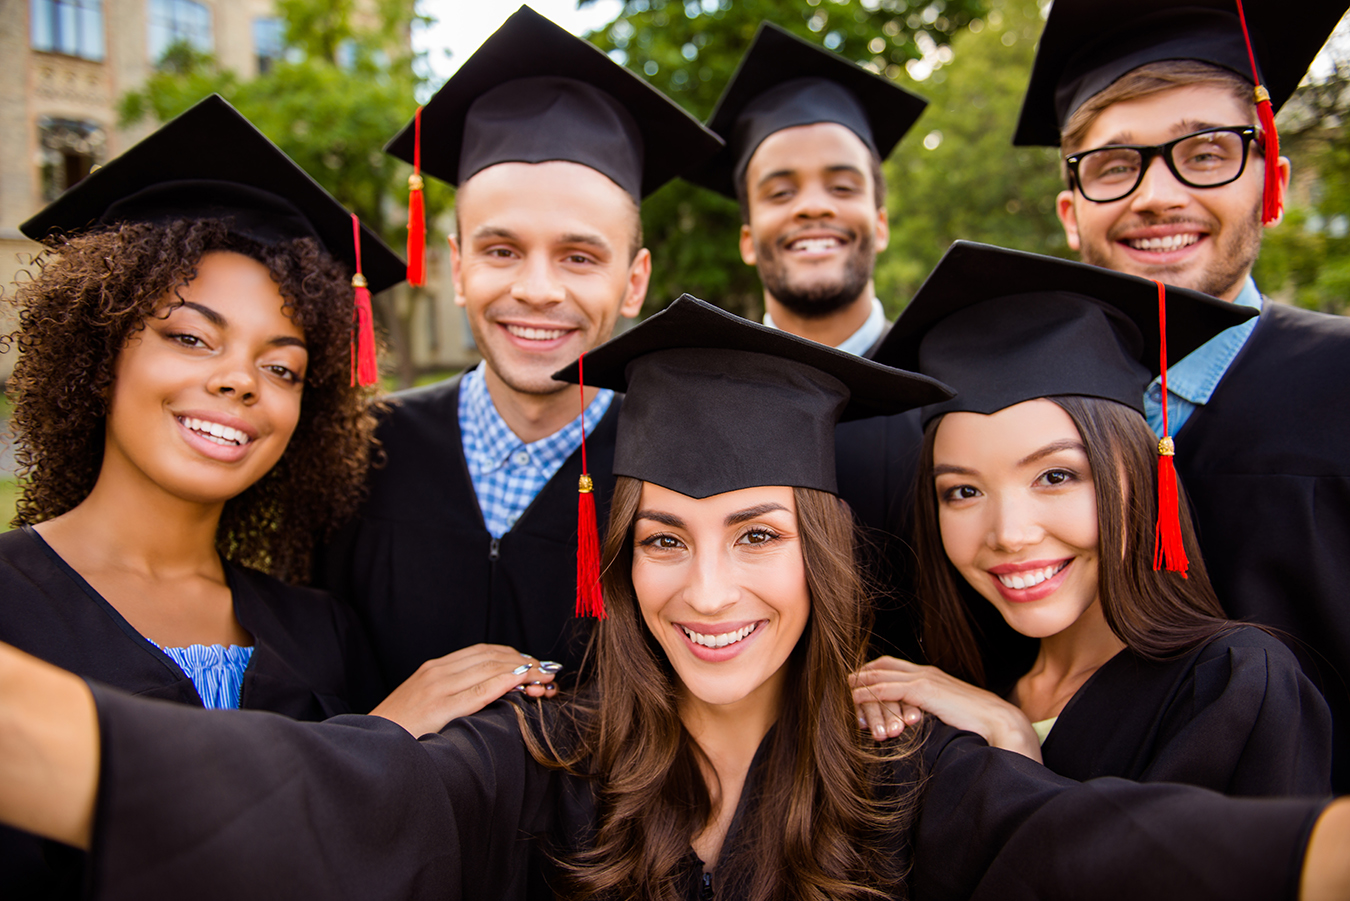 Selfie for memories. Six with cheerful graduates are posing for selfie shot, attractive brunette lady is taking, wearing gowns and mortar boards, outside on a summer day